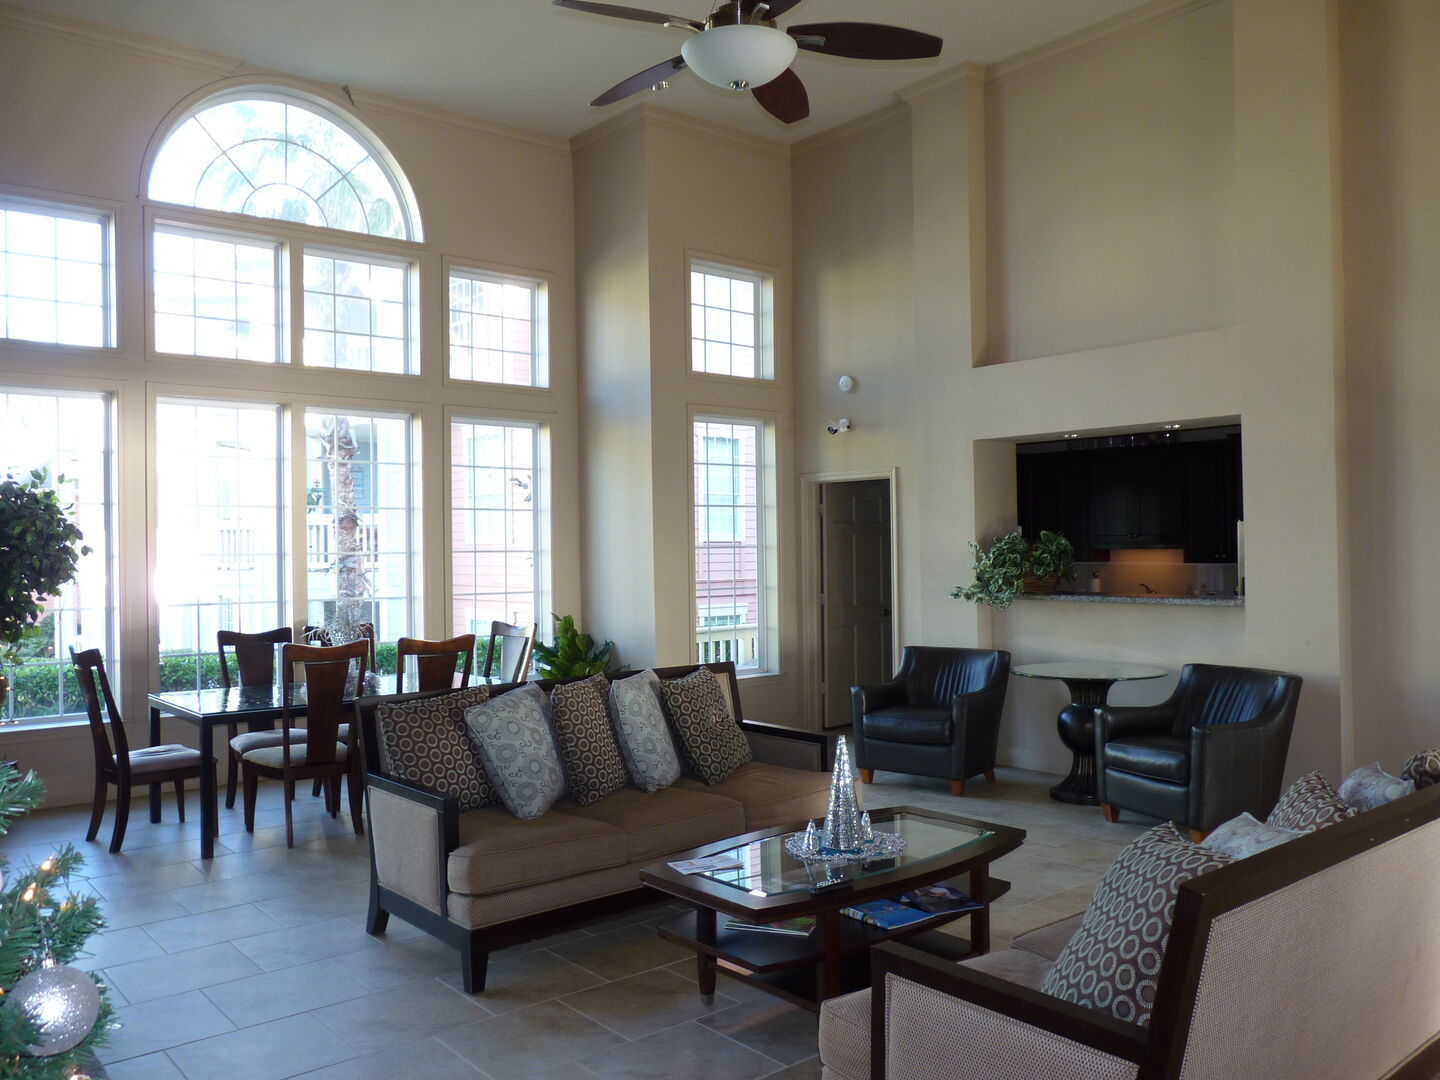 The Clubhouse Area is comfortable and welcoming